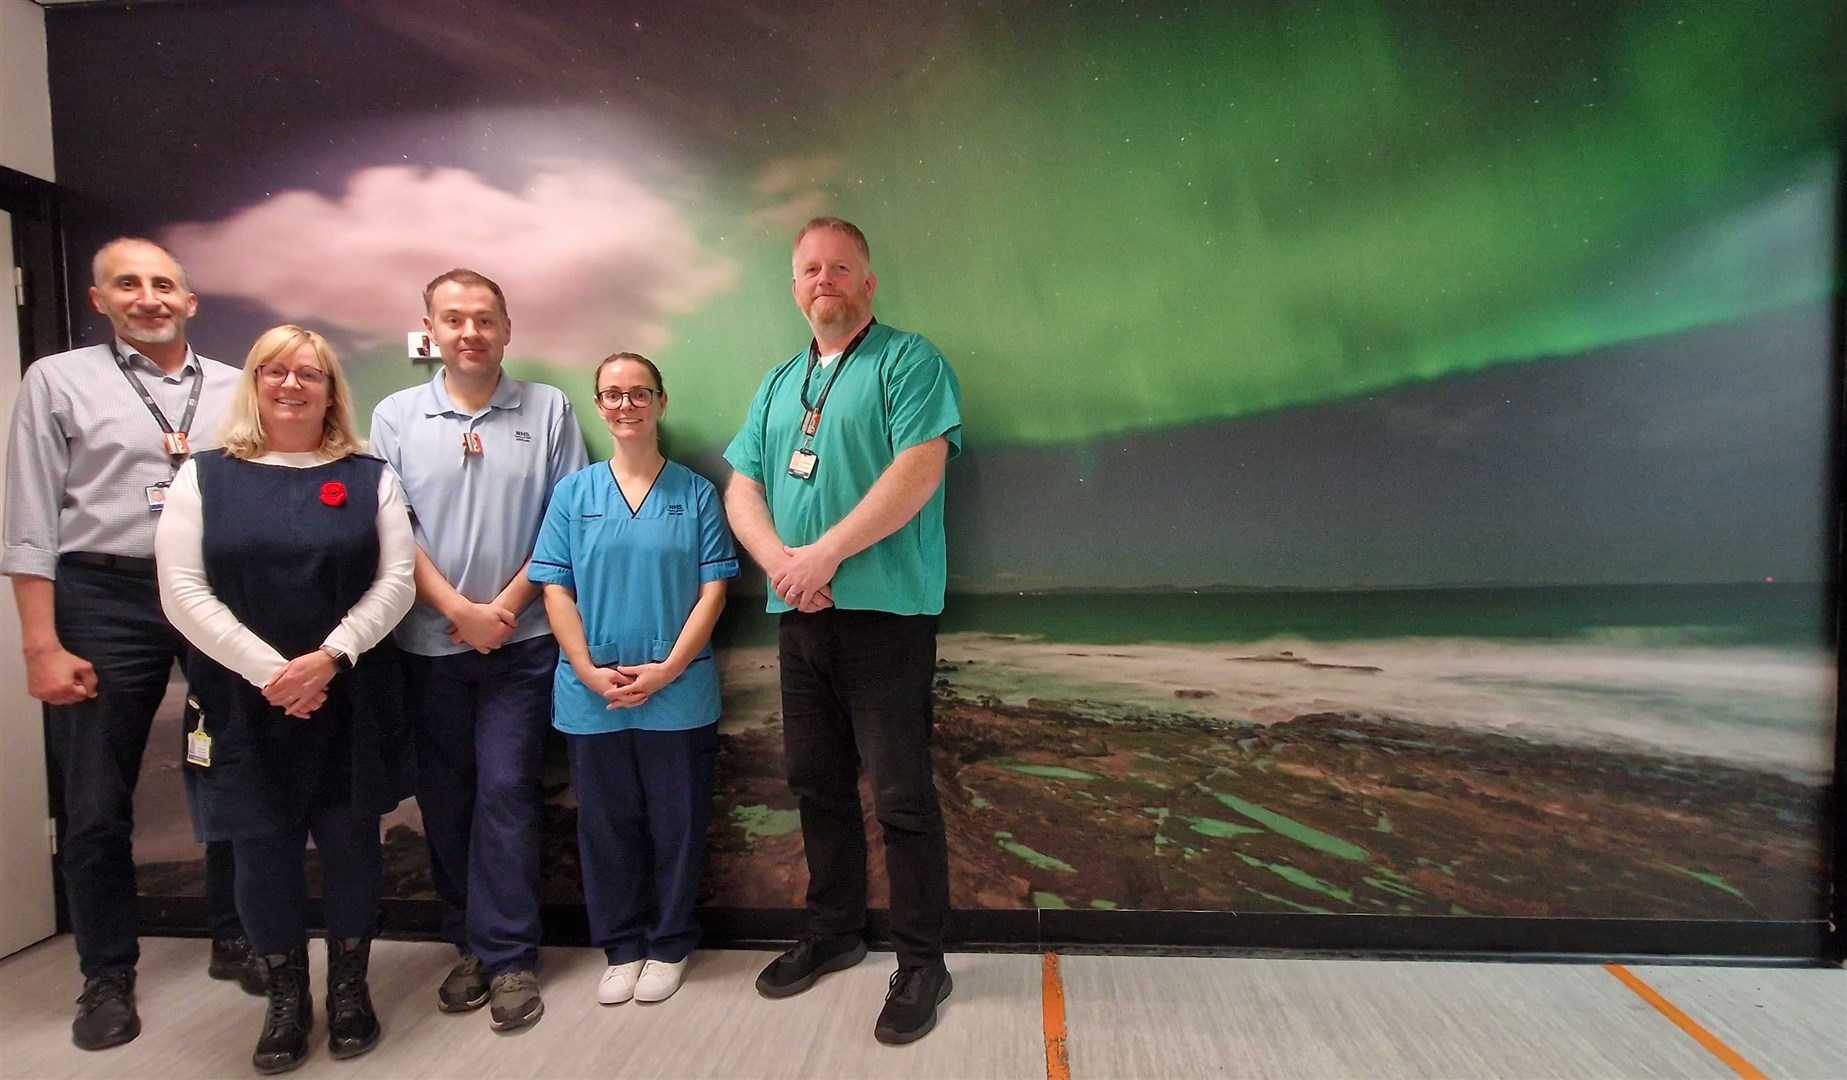 The stunning Northern Lights over Burghead, from left, Dr Rafik (consultant radiologist), Morag Howard (radiology site superintendent), Christopher Dafter (health care support worker), Jennifer Monkhouse, (sonographer/radiographer) and Struan Wilkie (consultant radiologist).